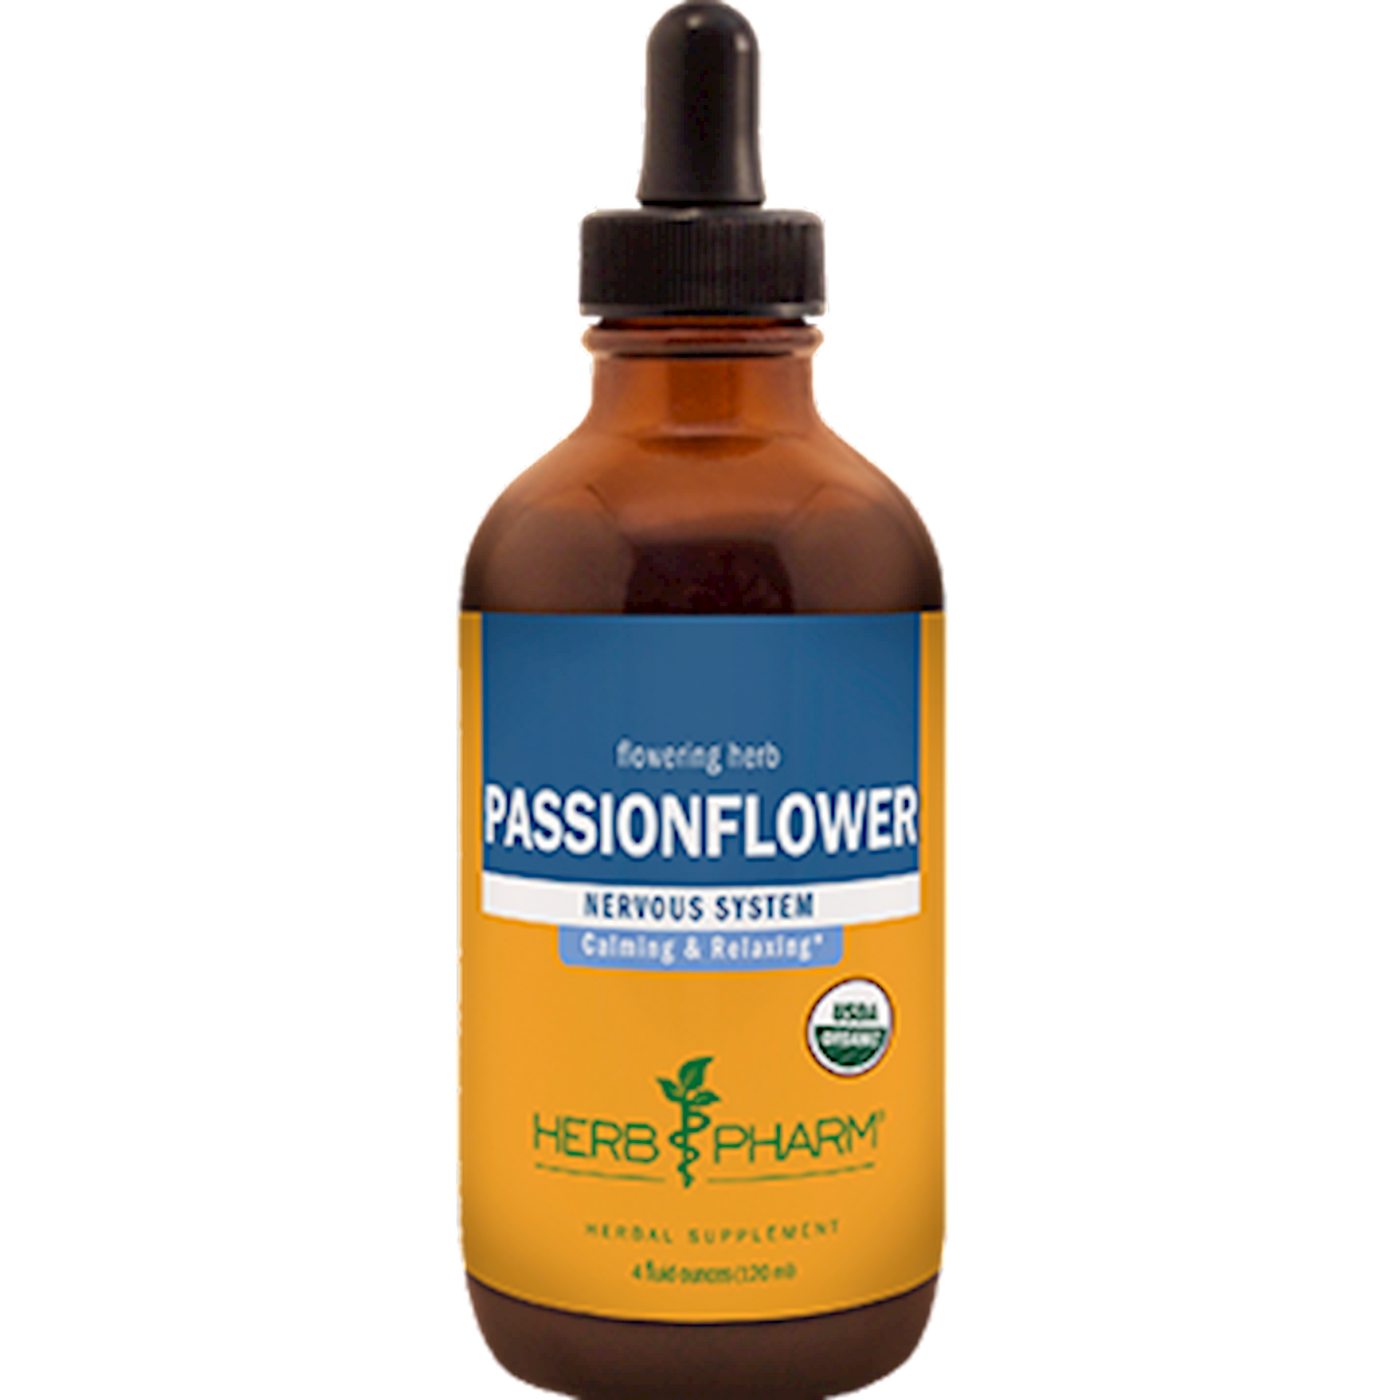 Passionflower Organic  Curated Wellness